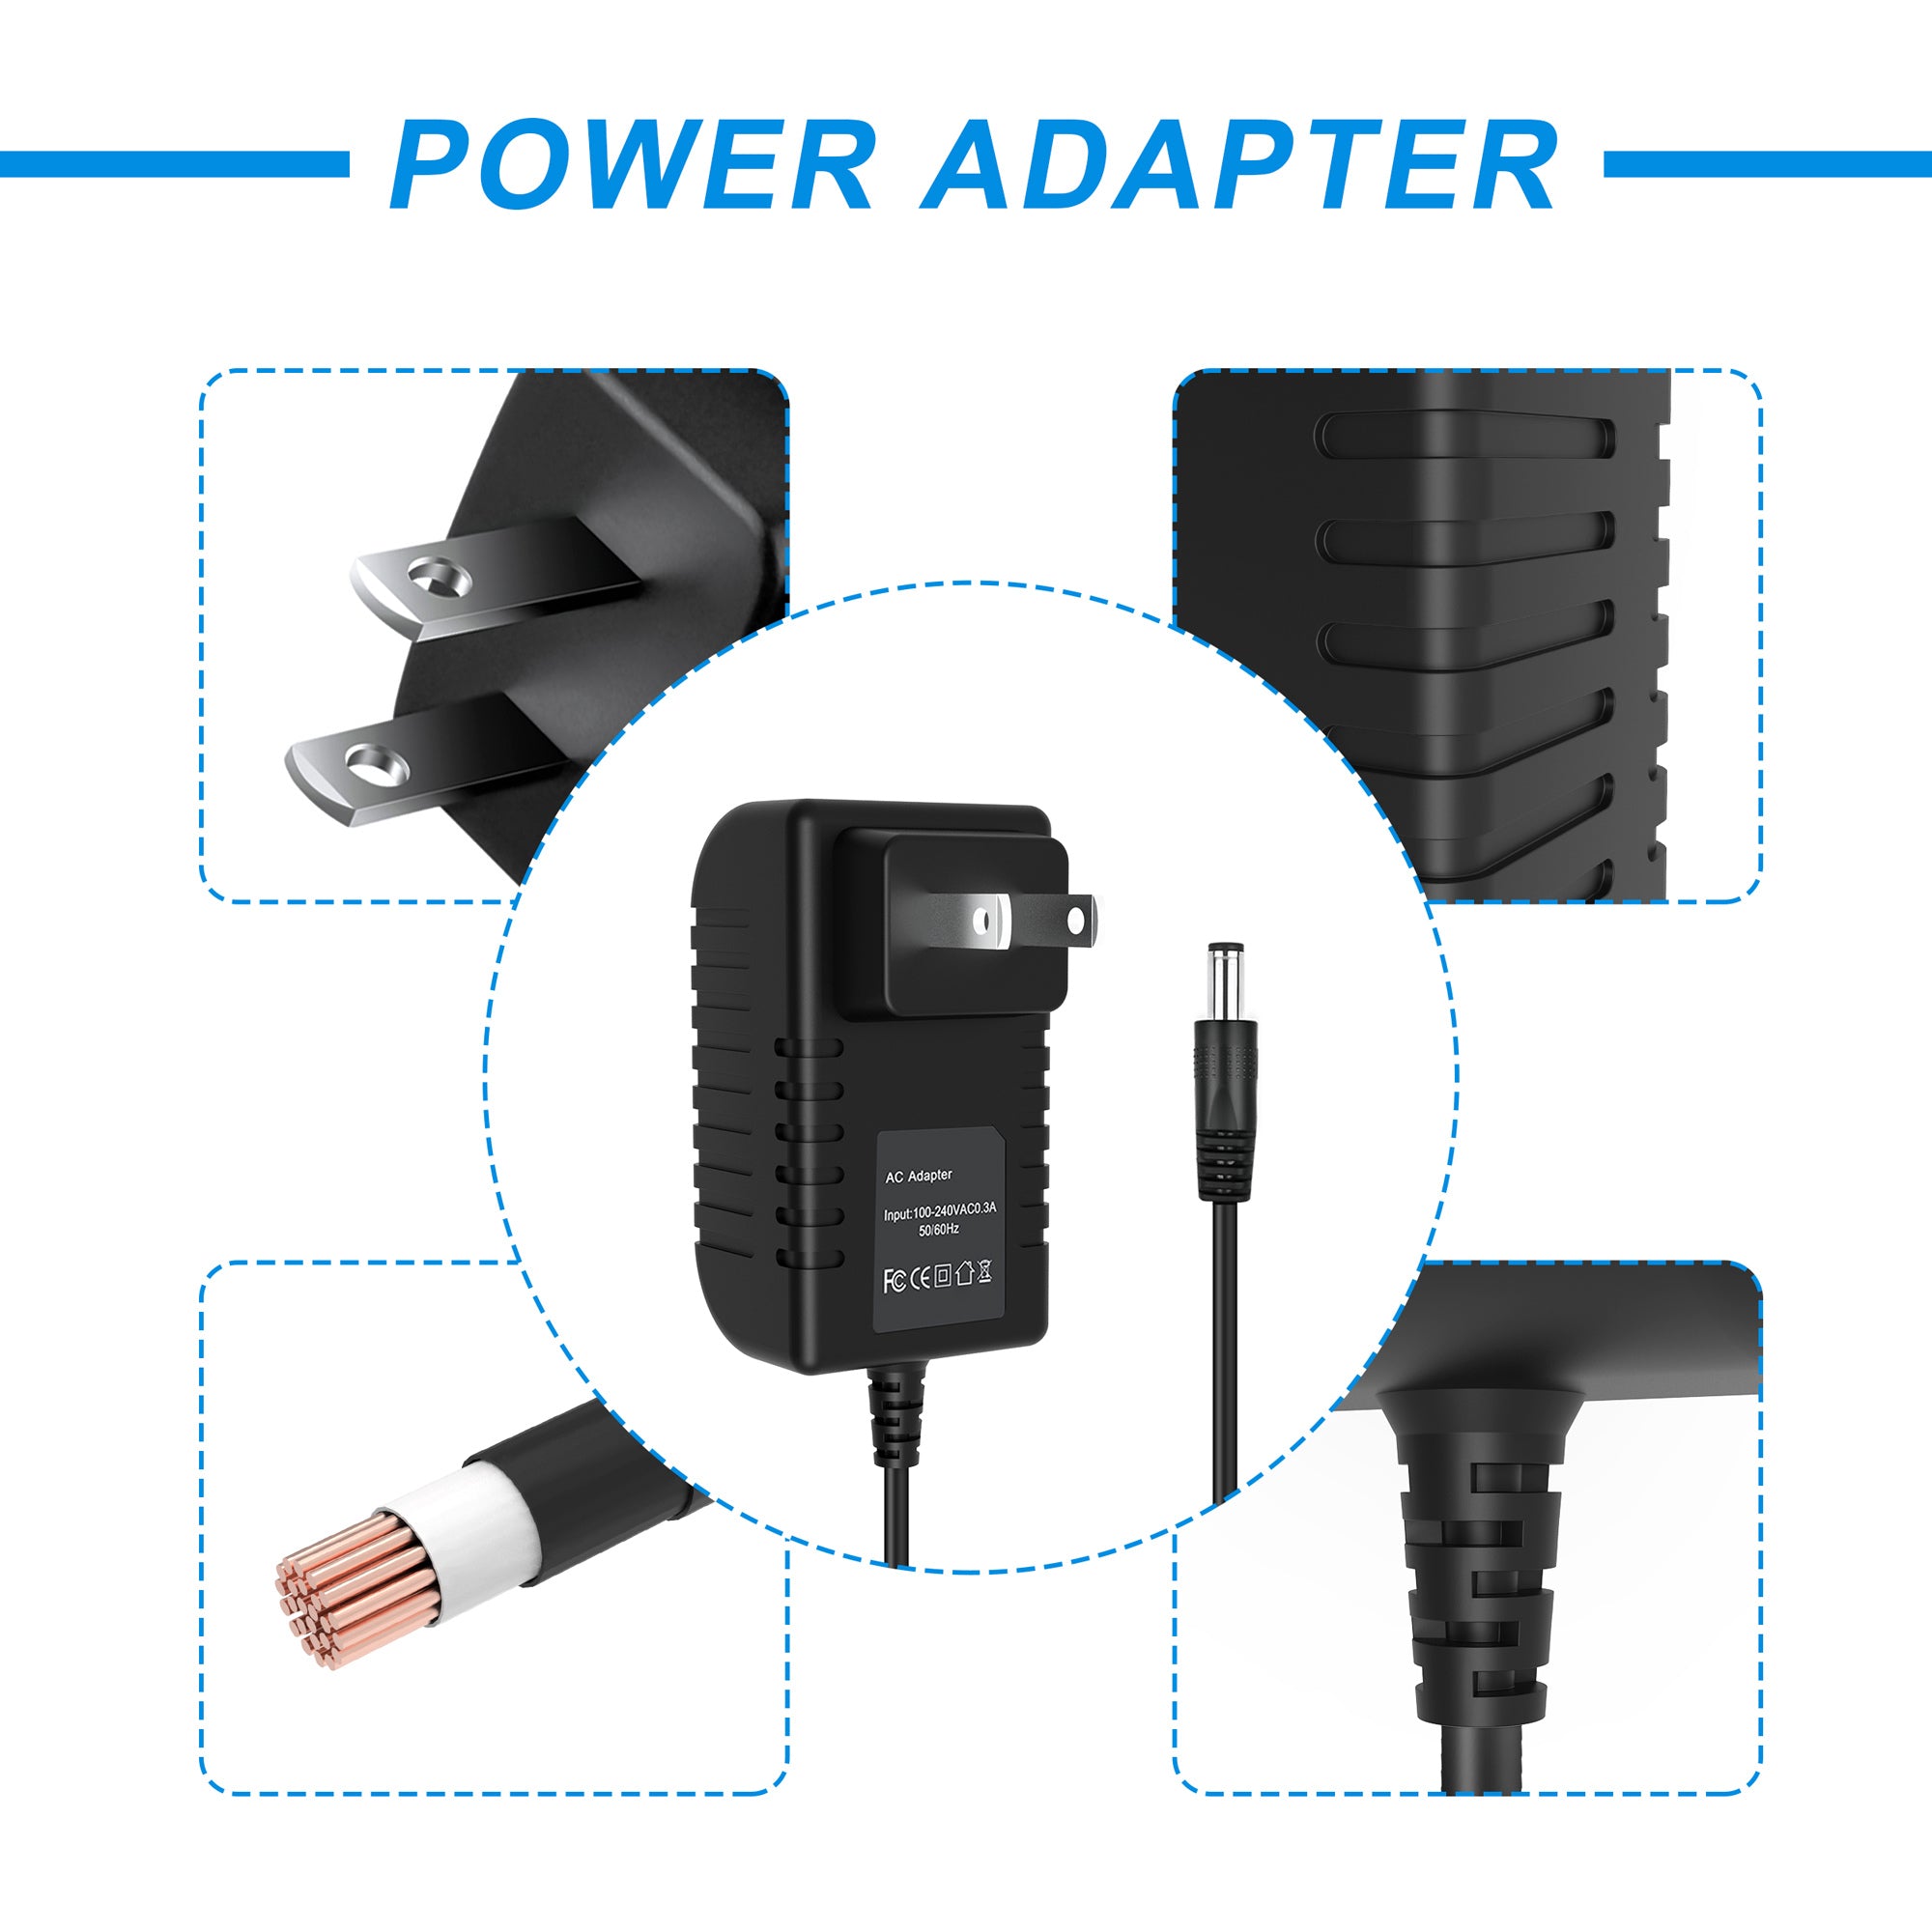 AbleGrid  9V AC/DC Adapter Compatible with E-TEK BS iLUV Model: ZDA090150m-N (m=US, EU, BS, AU) ETEK 9.0V 1500mA 9VDC 1.5A Power Supply Cord Cable Charger Mains PSU